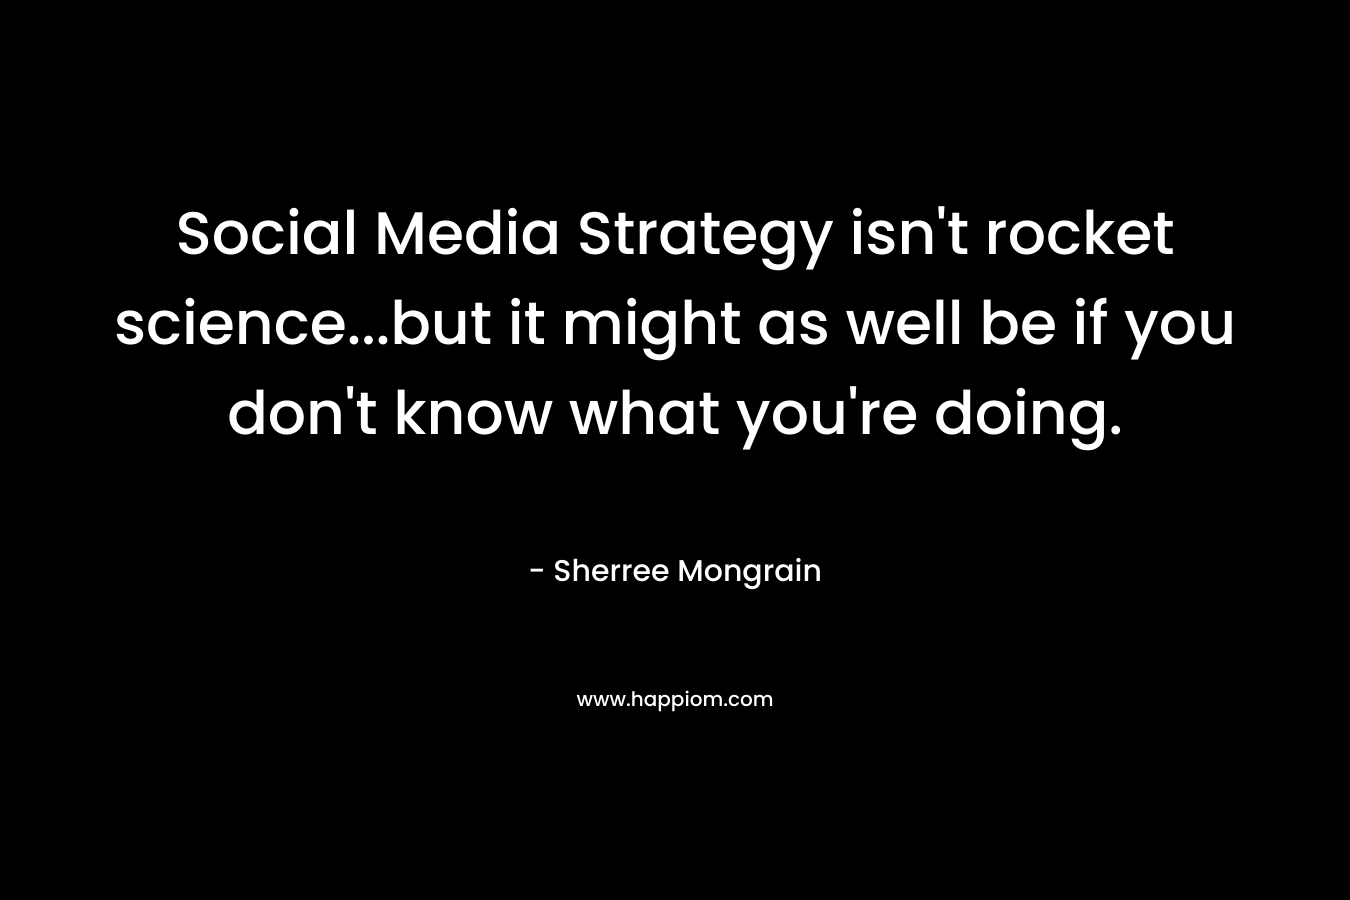 Social Media Strategy isn’t rocket science…but it might as well be if you don’t know what you’re doing. – Sherree Mongrain